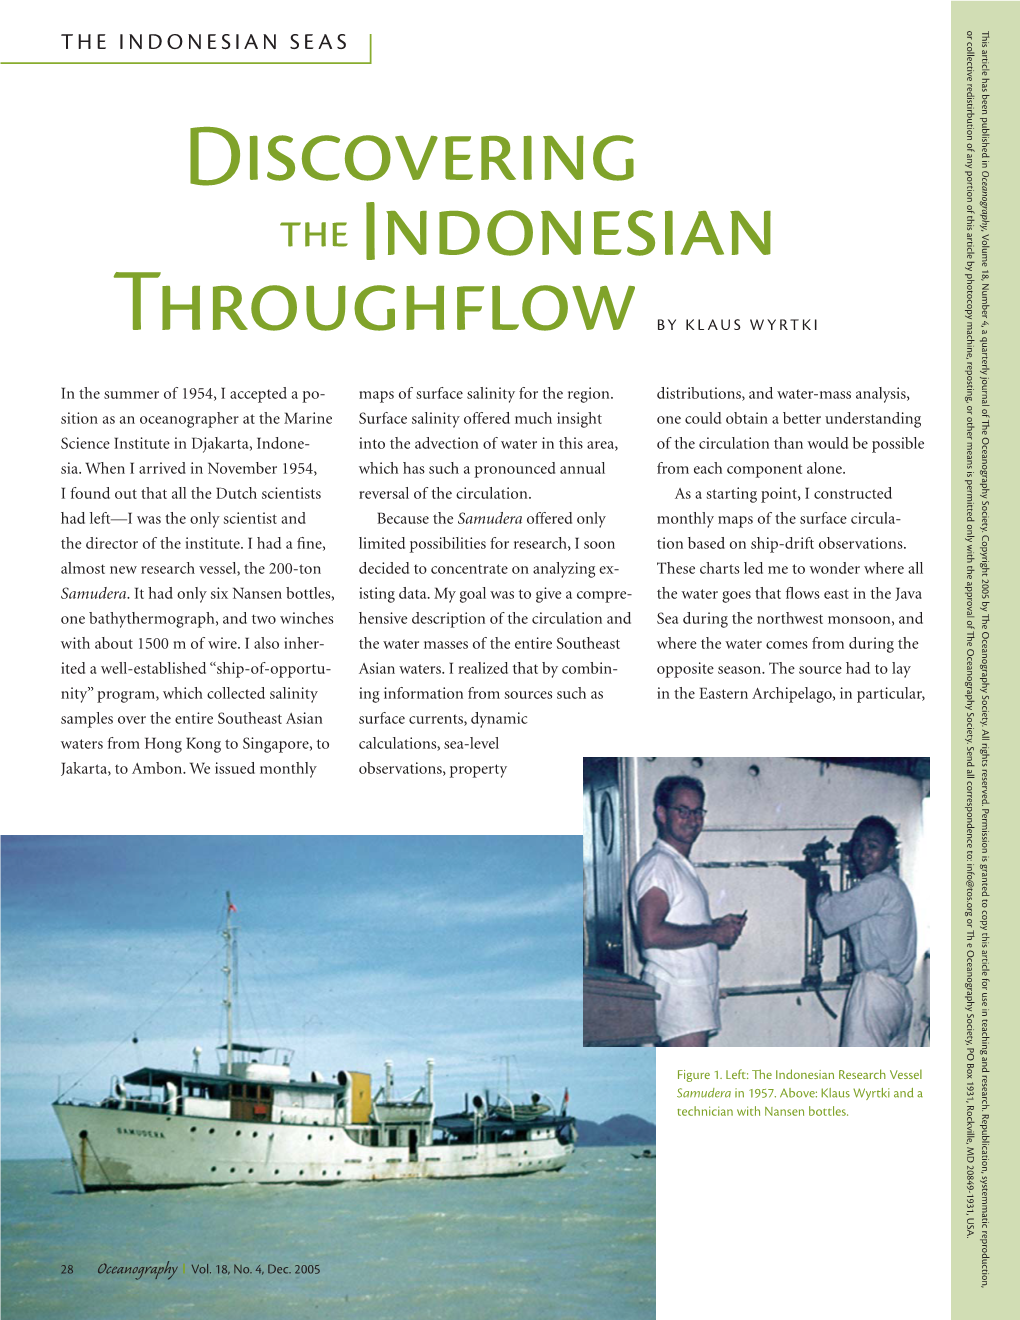 Discovering the Indonesian Throughflow